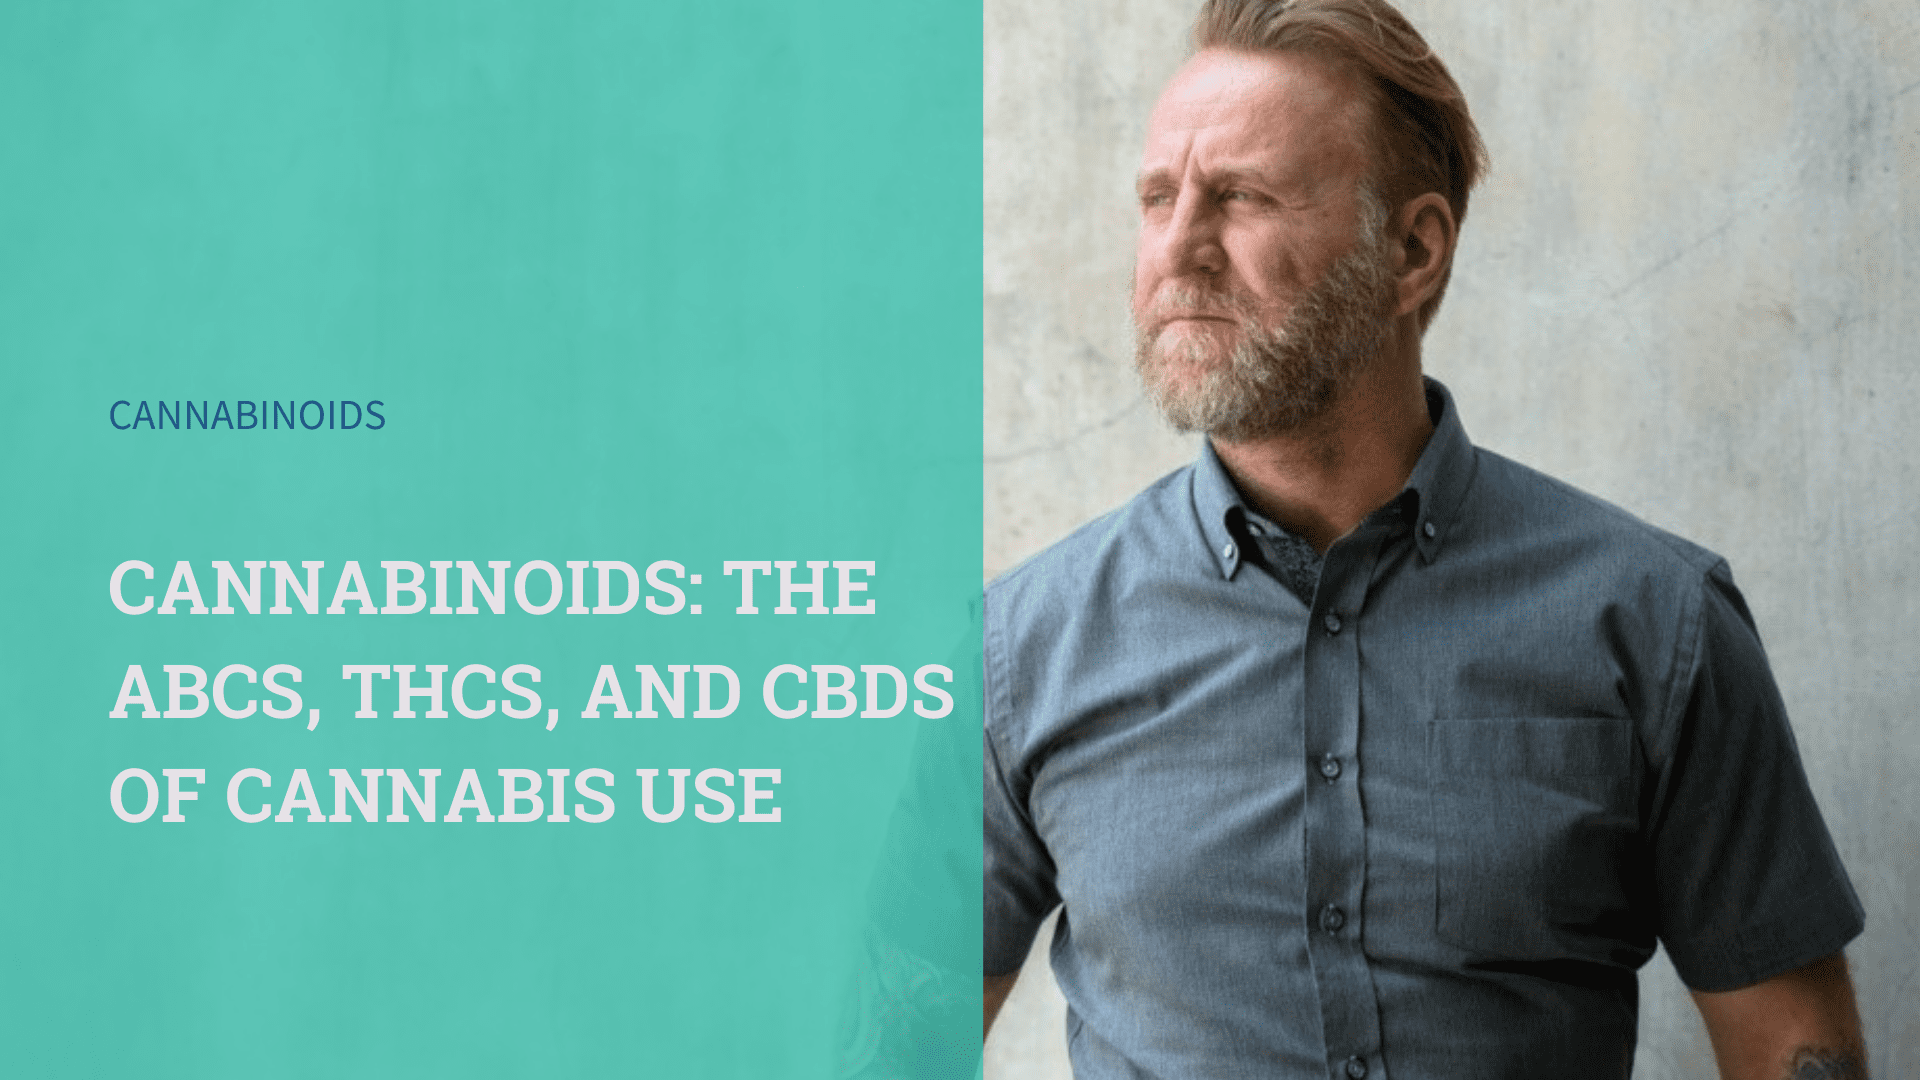 Cannabinoids: The ABCs, THCs, and CBDs of Cannabis Use